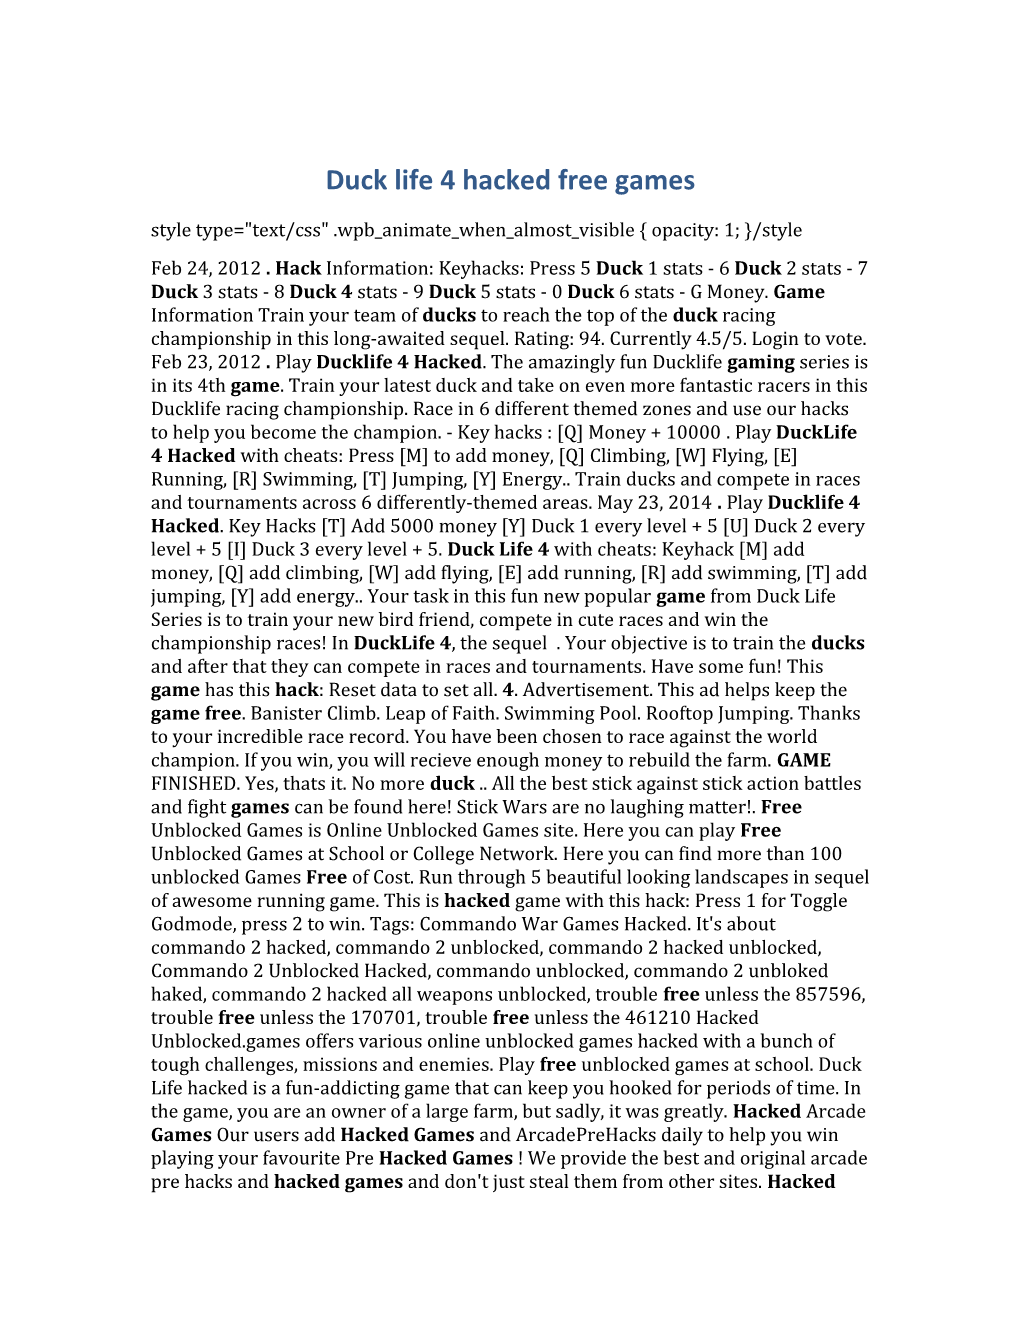 Duck Life 4 Hacked Free Games